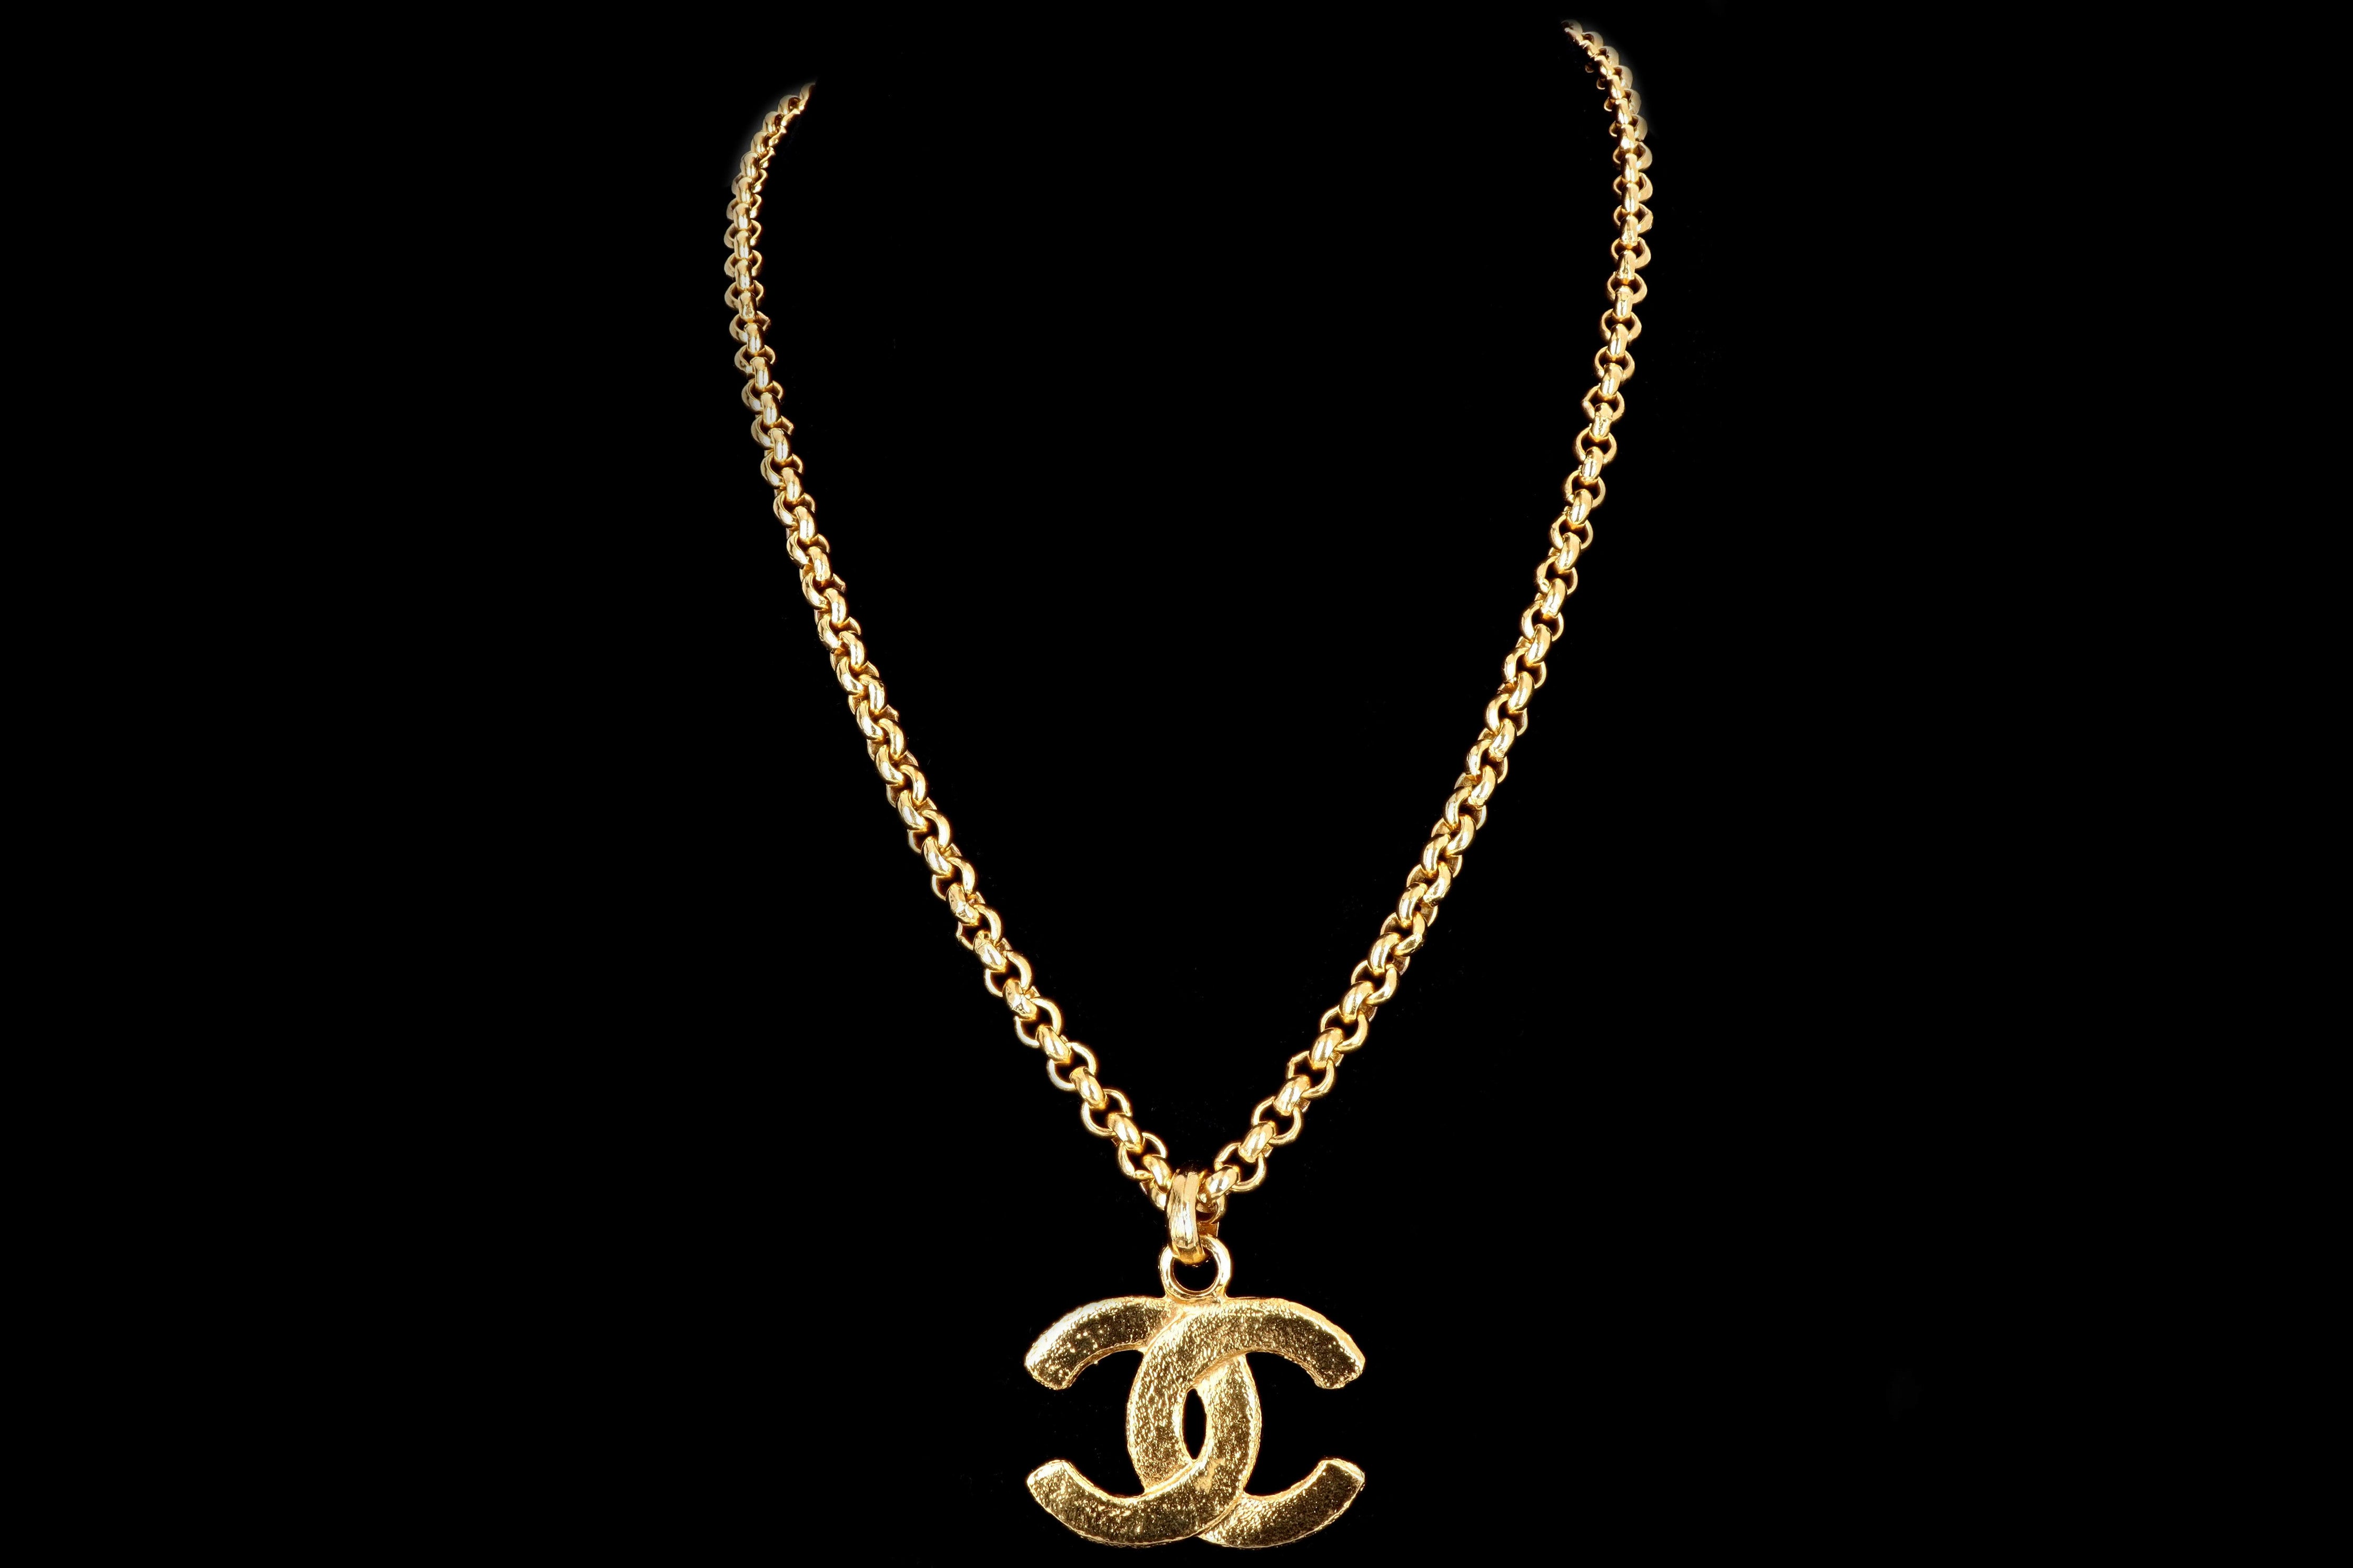 chanel chain necklace gold 14k